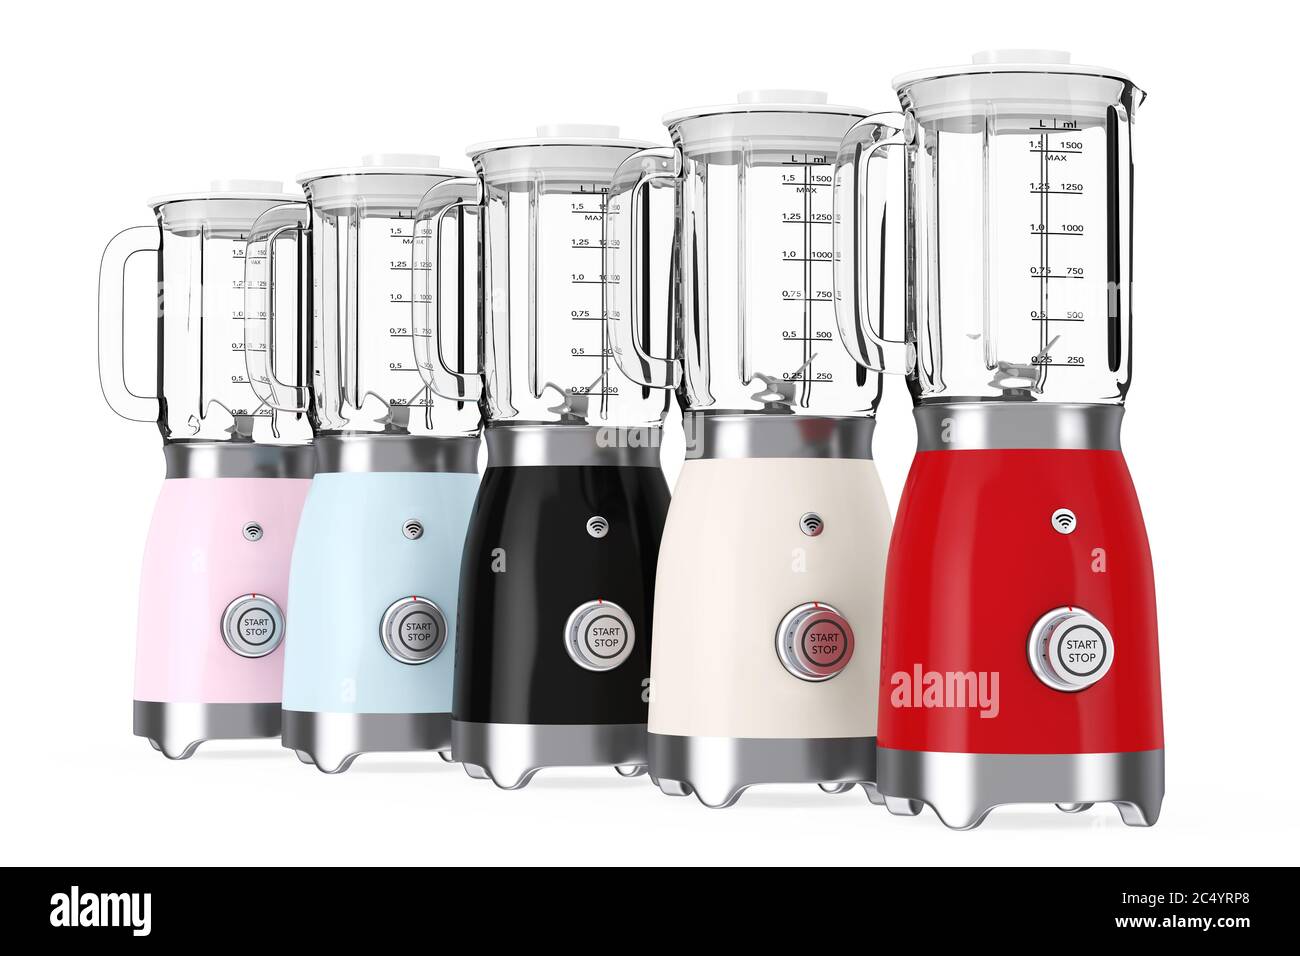 https://c8.alamy.com/comp/2C4YRP8/kitchen-appliance-concept-modern-multicolour-electric-blenders-on-a-white-background-3d-rendering-2C4YRP8.jpg